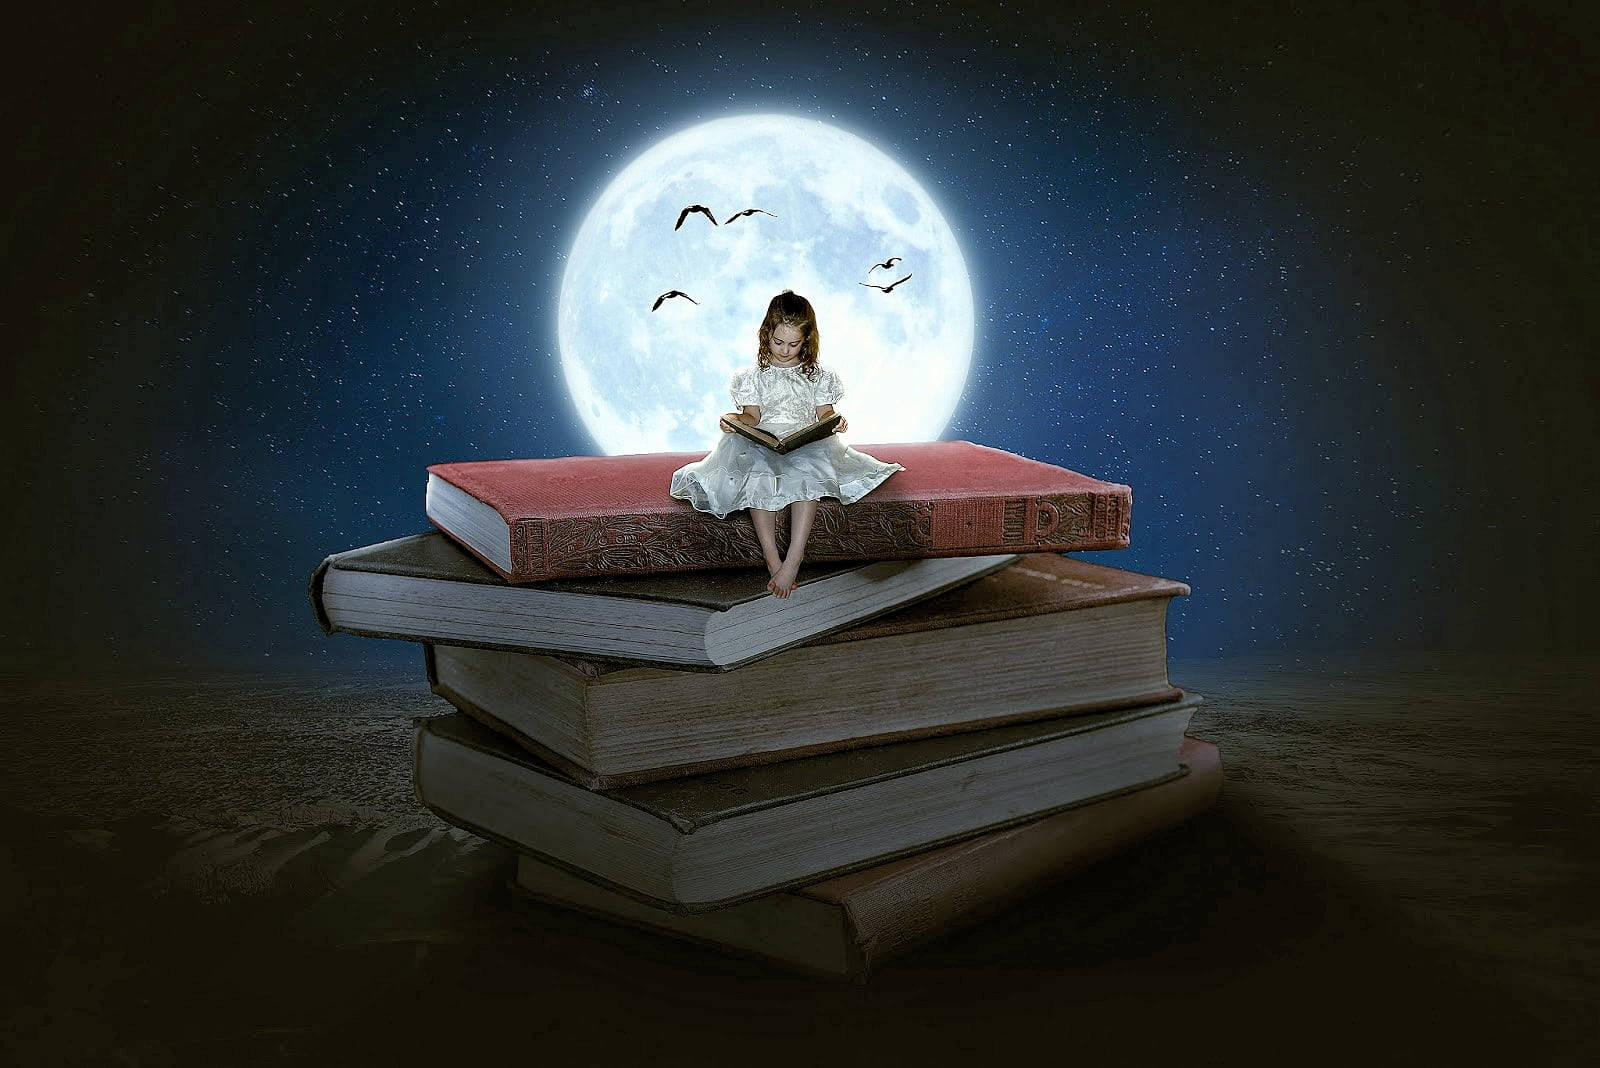 A Girl Dreaming On A Pile Of Books